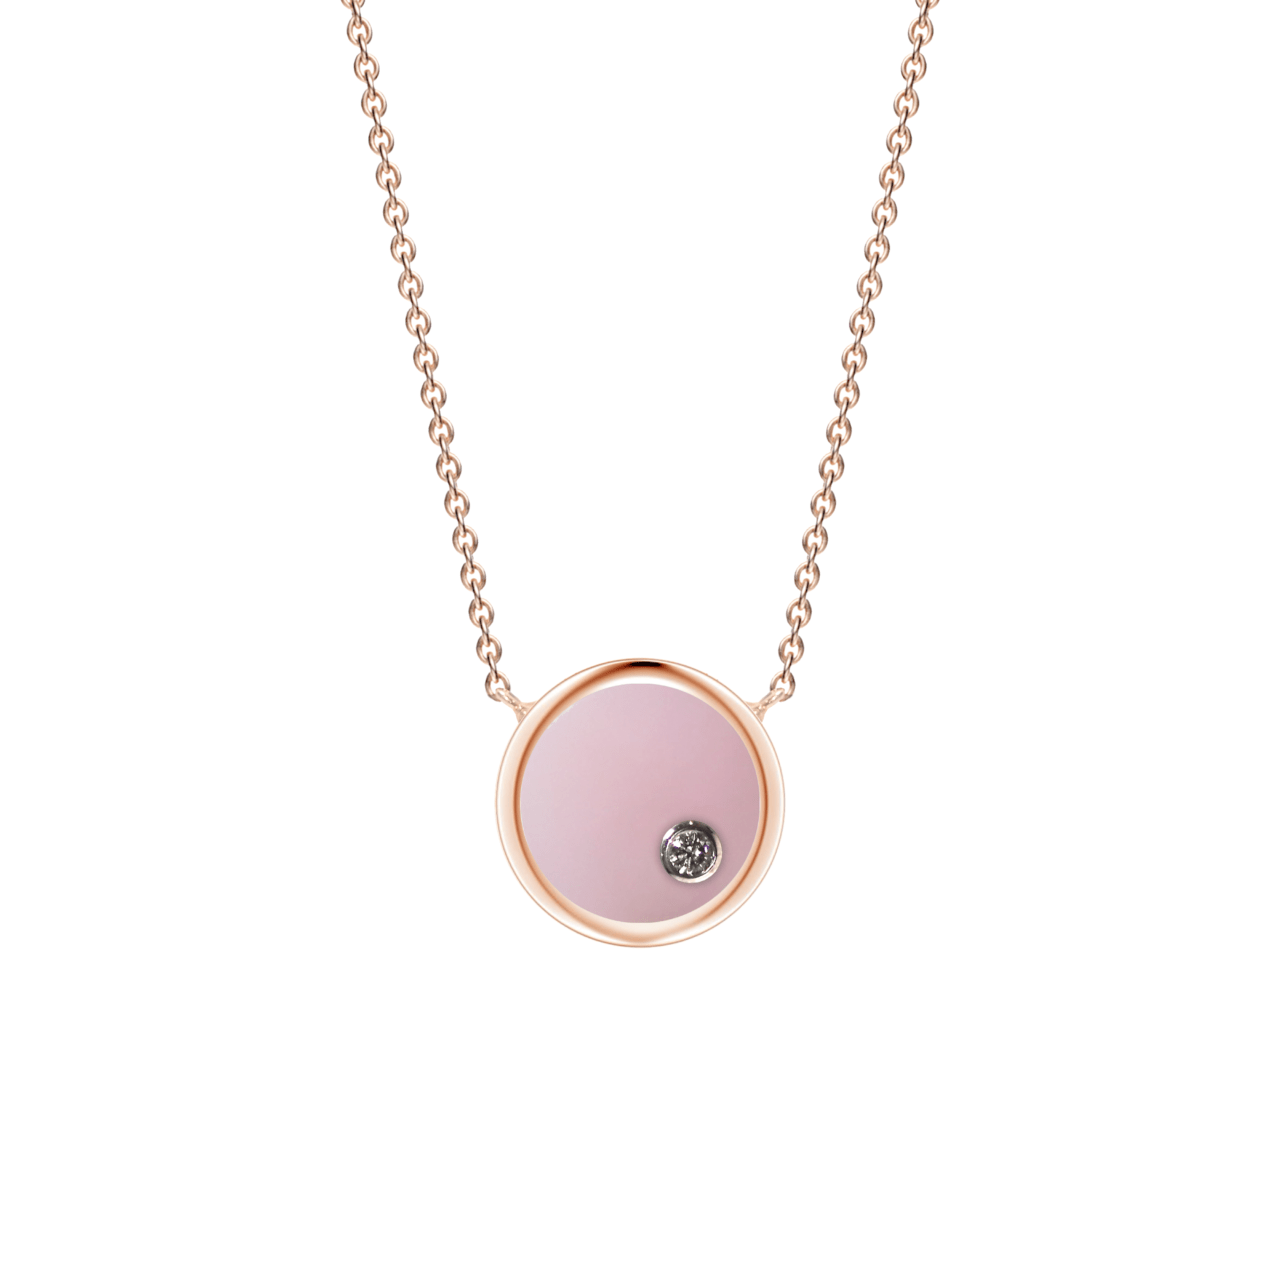 Libra necklace in pink and gold colors.